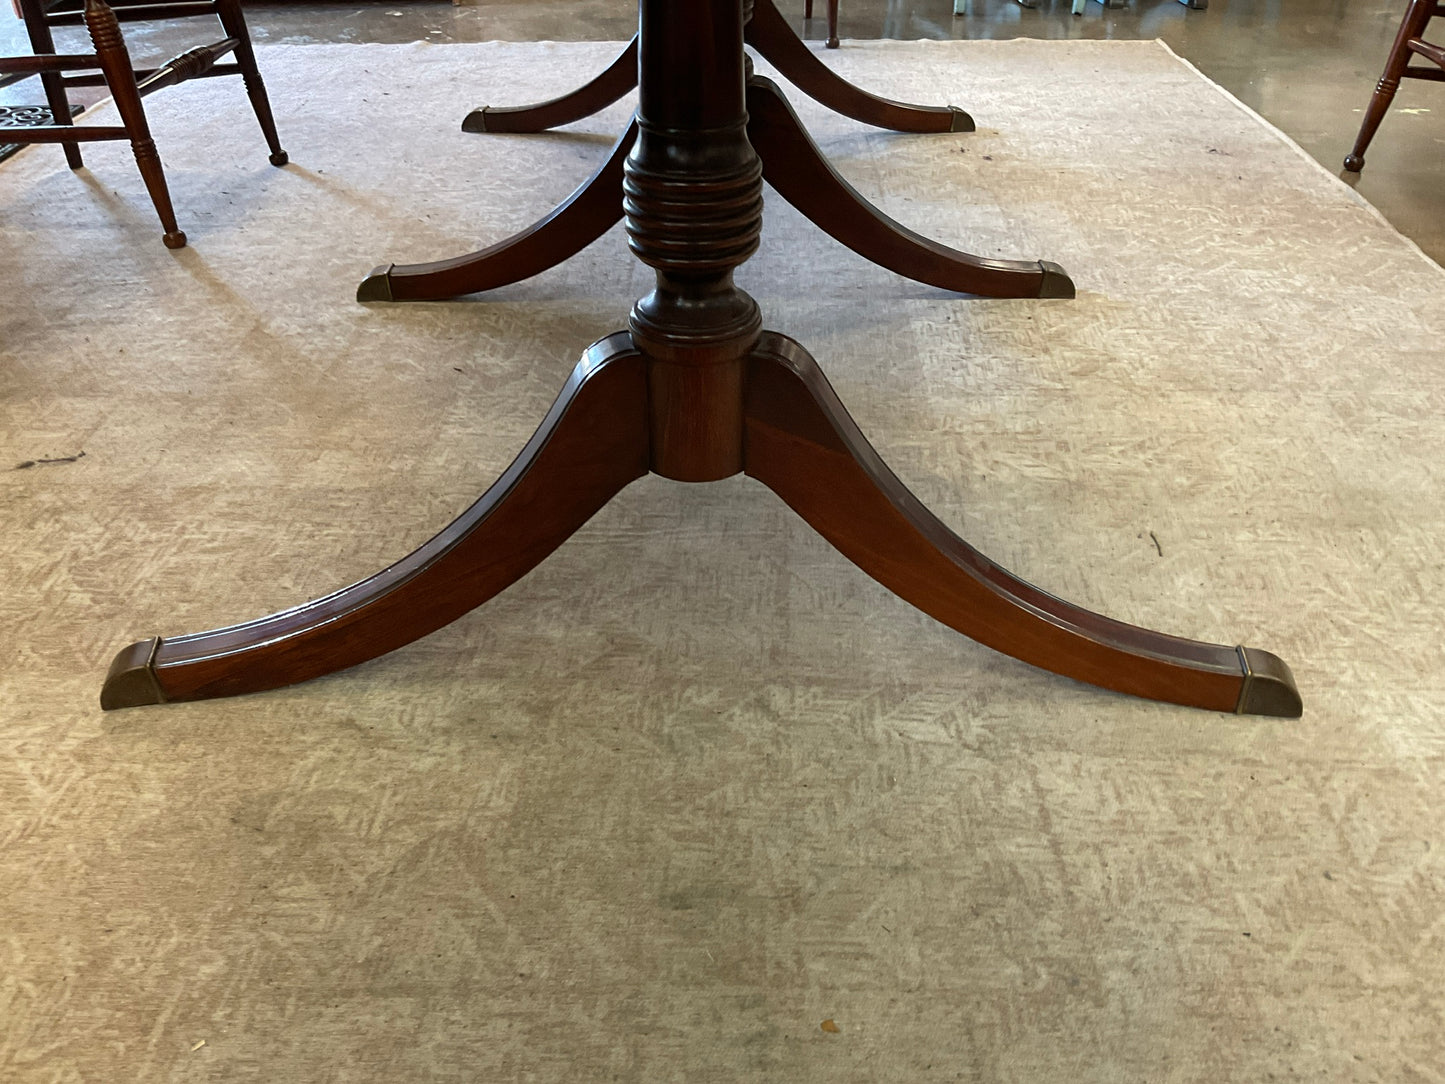 Federal Style White Furniture Co. Extendable Dining Table W/ 6 Tell City Chairs **AT OUR 1ST STREET LOCATION**